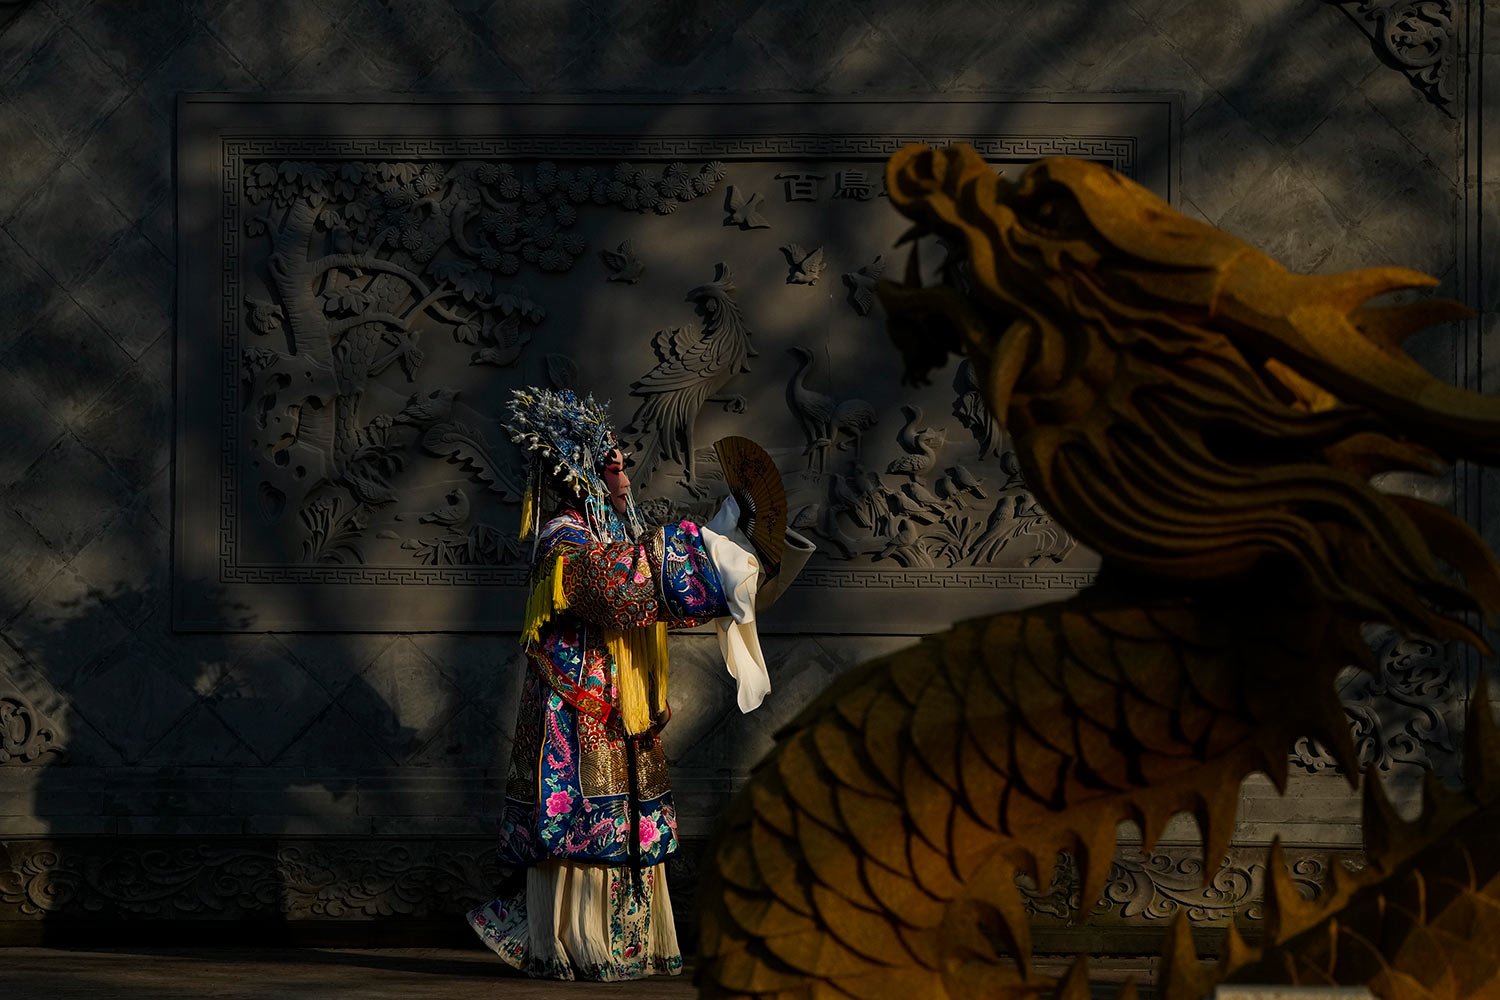  An artist dressed in a Chinese opera costume performs near a dragon statue during an official event at Ting Sun Guan, Heptachord Terrace in Wuhan in central China's Hubei province, Monday, May 8, 2023. (AP Photo/Andy Wong) 